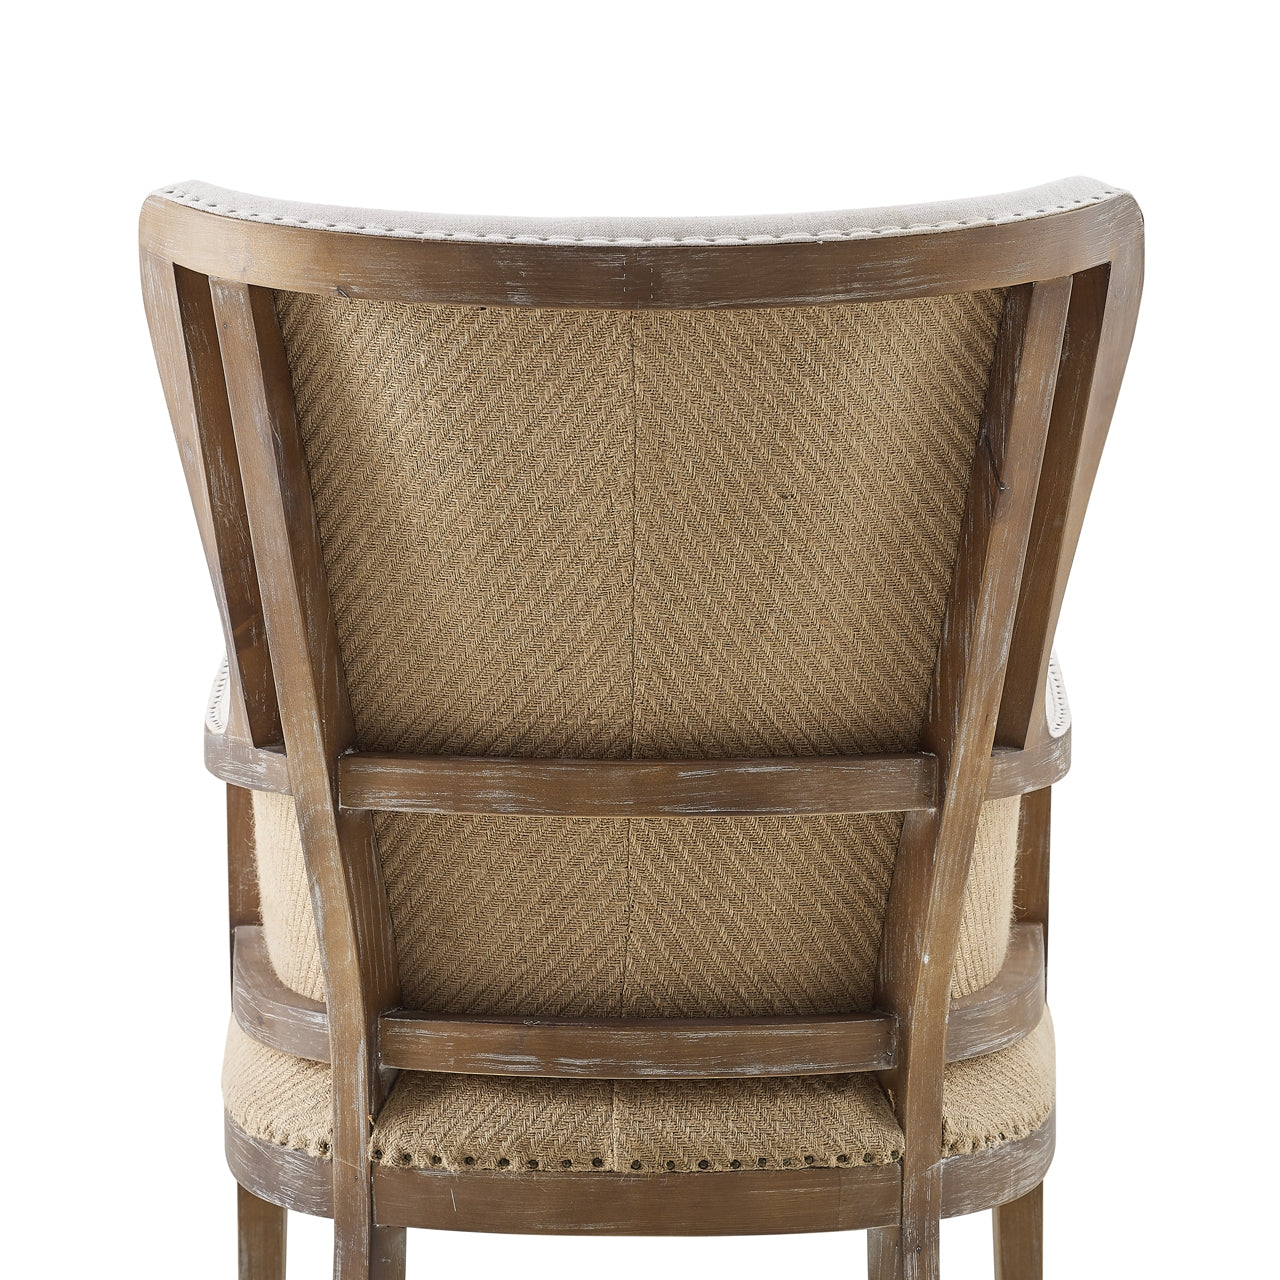 WEEKLY or MONTHLY. Mister George Two-tone Wingback Accent Chair